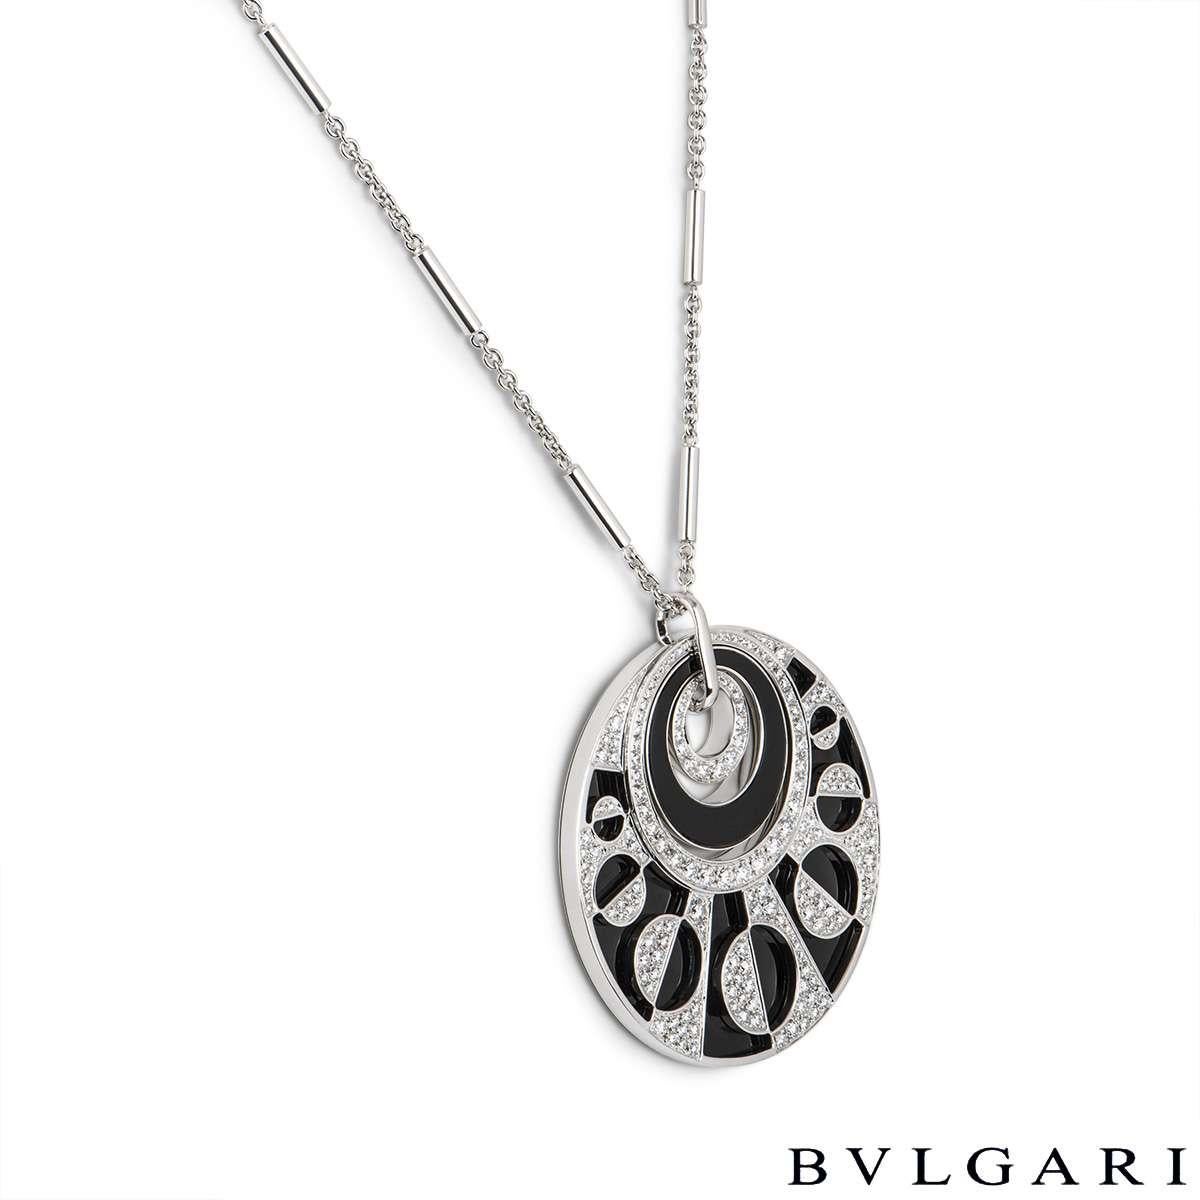 A stunning 18k white gold diamond and onyx large necklace by Bvlgari from the Intarsio collection. The necklace features 3 circular motifs within each other set with an onyx inlay and round brilliant cut diamonds in a pave setting with a total